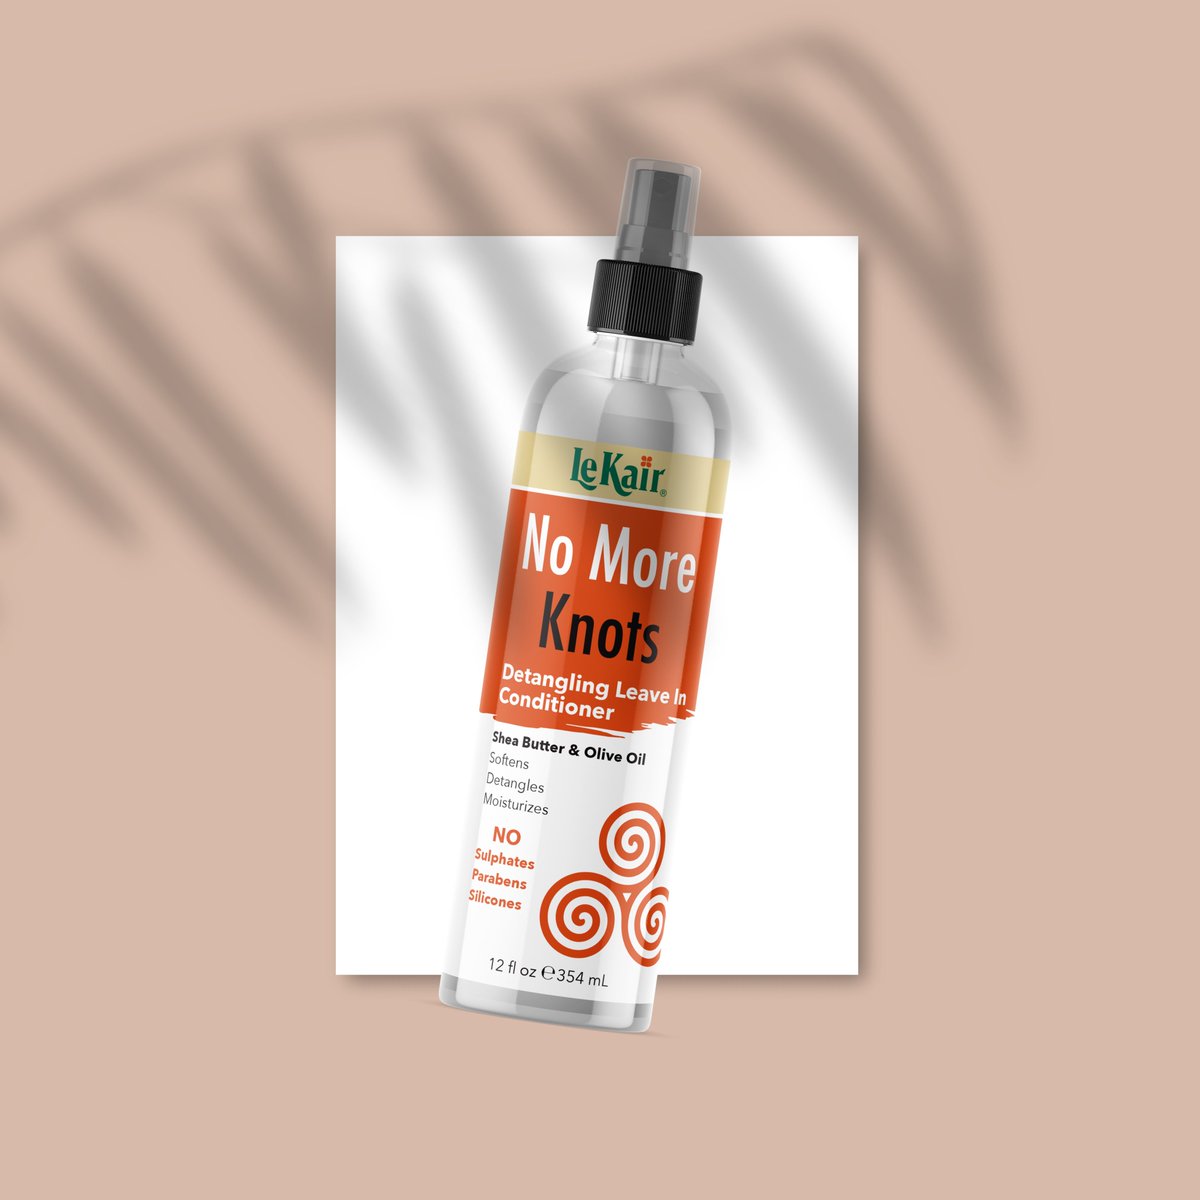 With Lekair’s No More Knots Detangling Leave In Conditioner knots won't stand a chance during wash day! ➿
.
.
#protectivestyles #naturalhaircare #naturalhaircareproducts #haircareproducts #naturalhair #coilyhair #kinkyhair #curlyhair #naturalhairstyles #naturalhairjourney